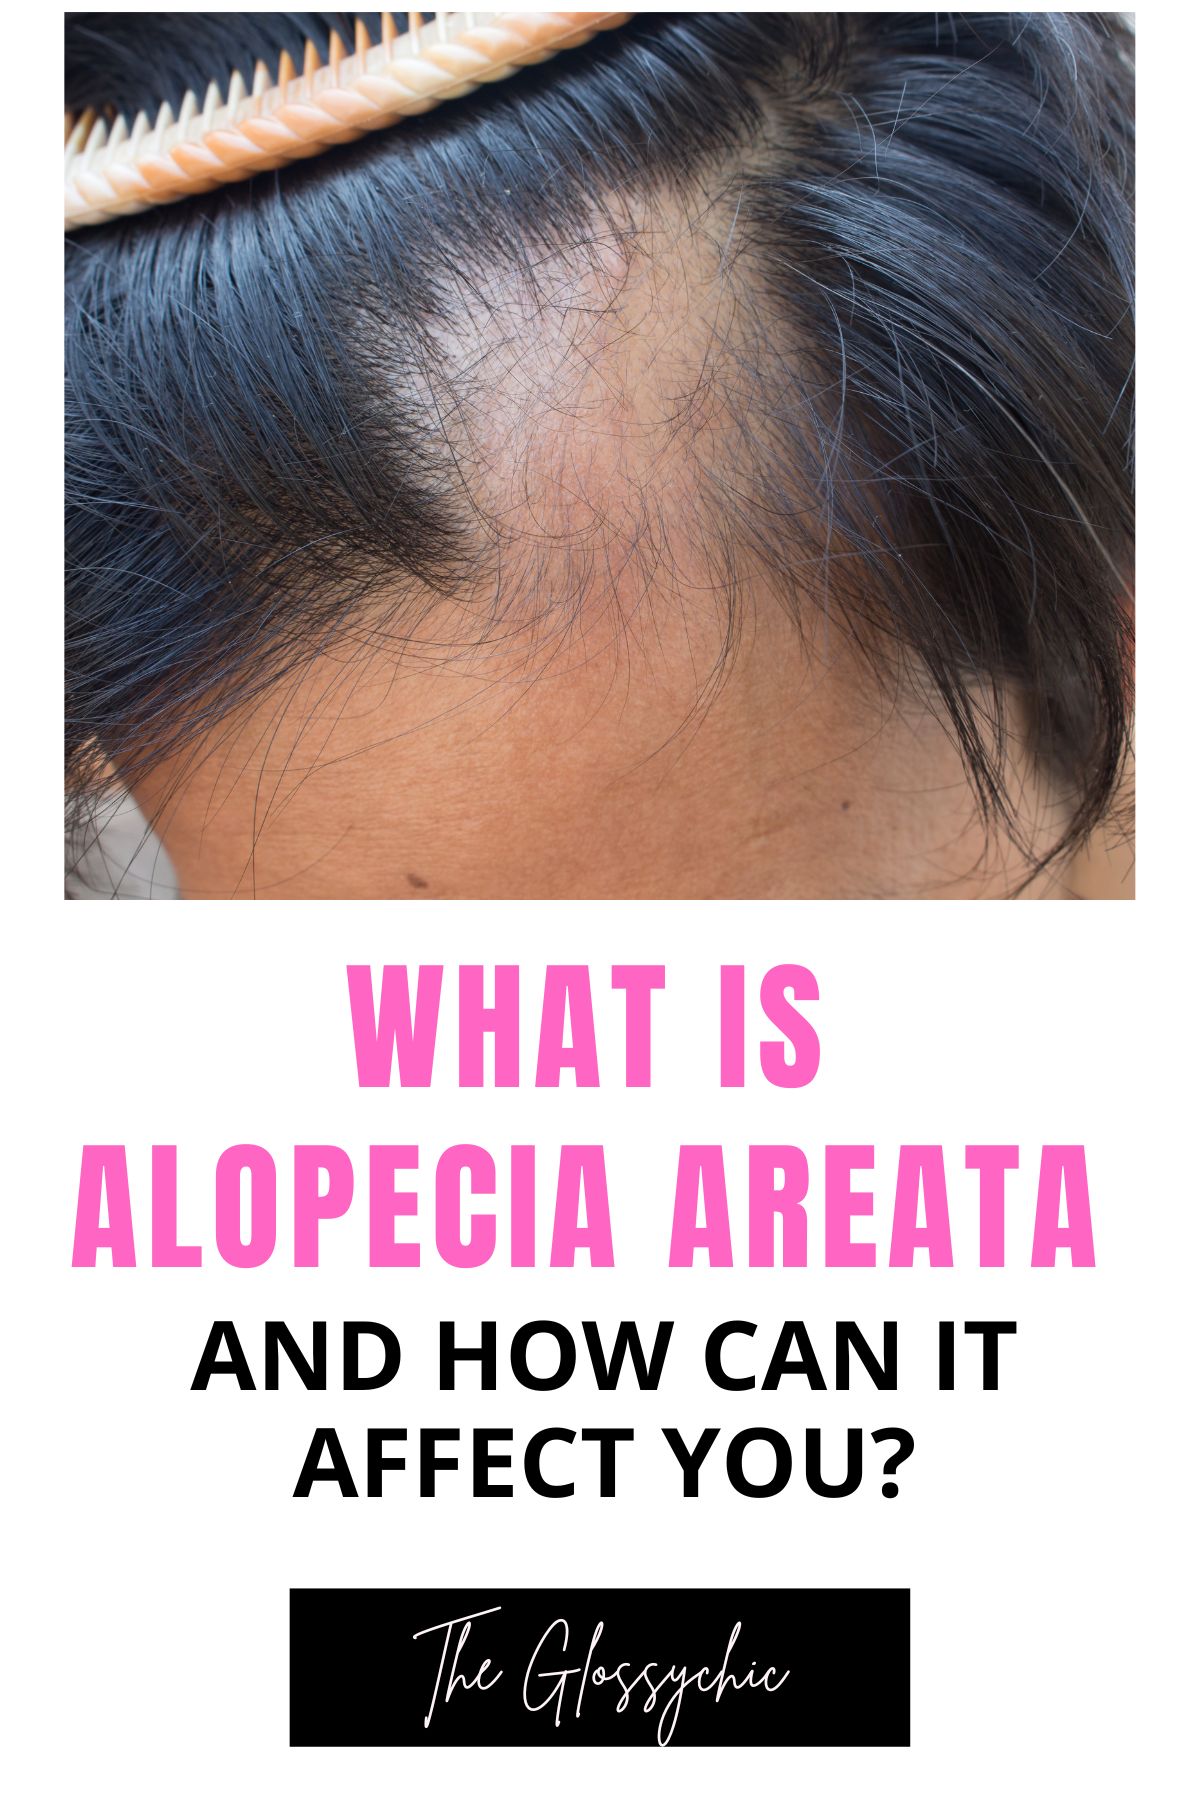 What Is Alopecia Areata And How Can It Affect You?